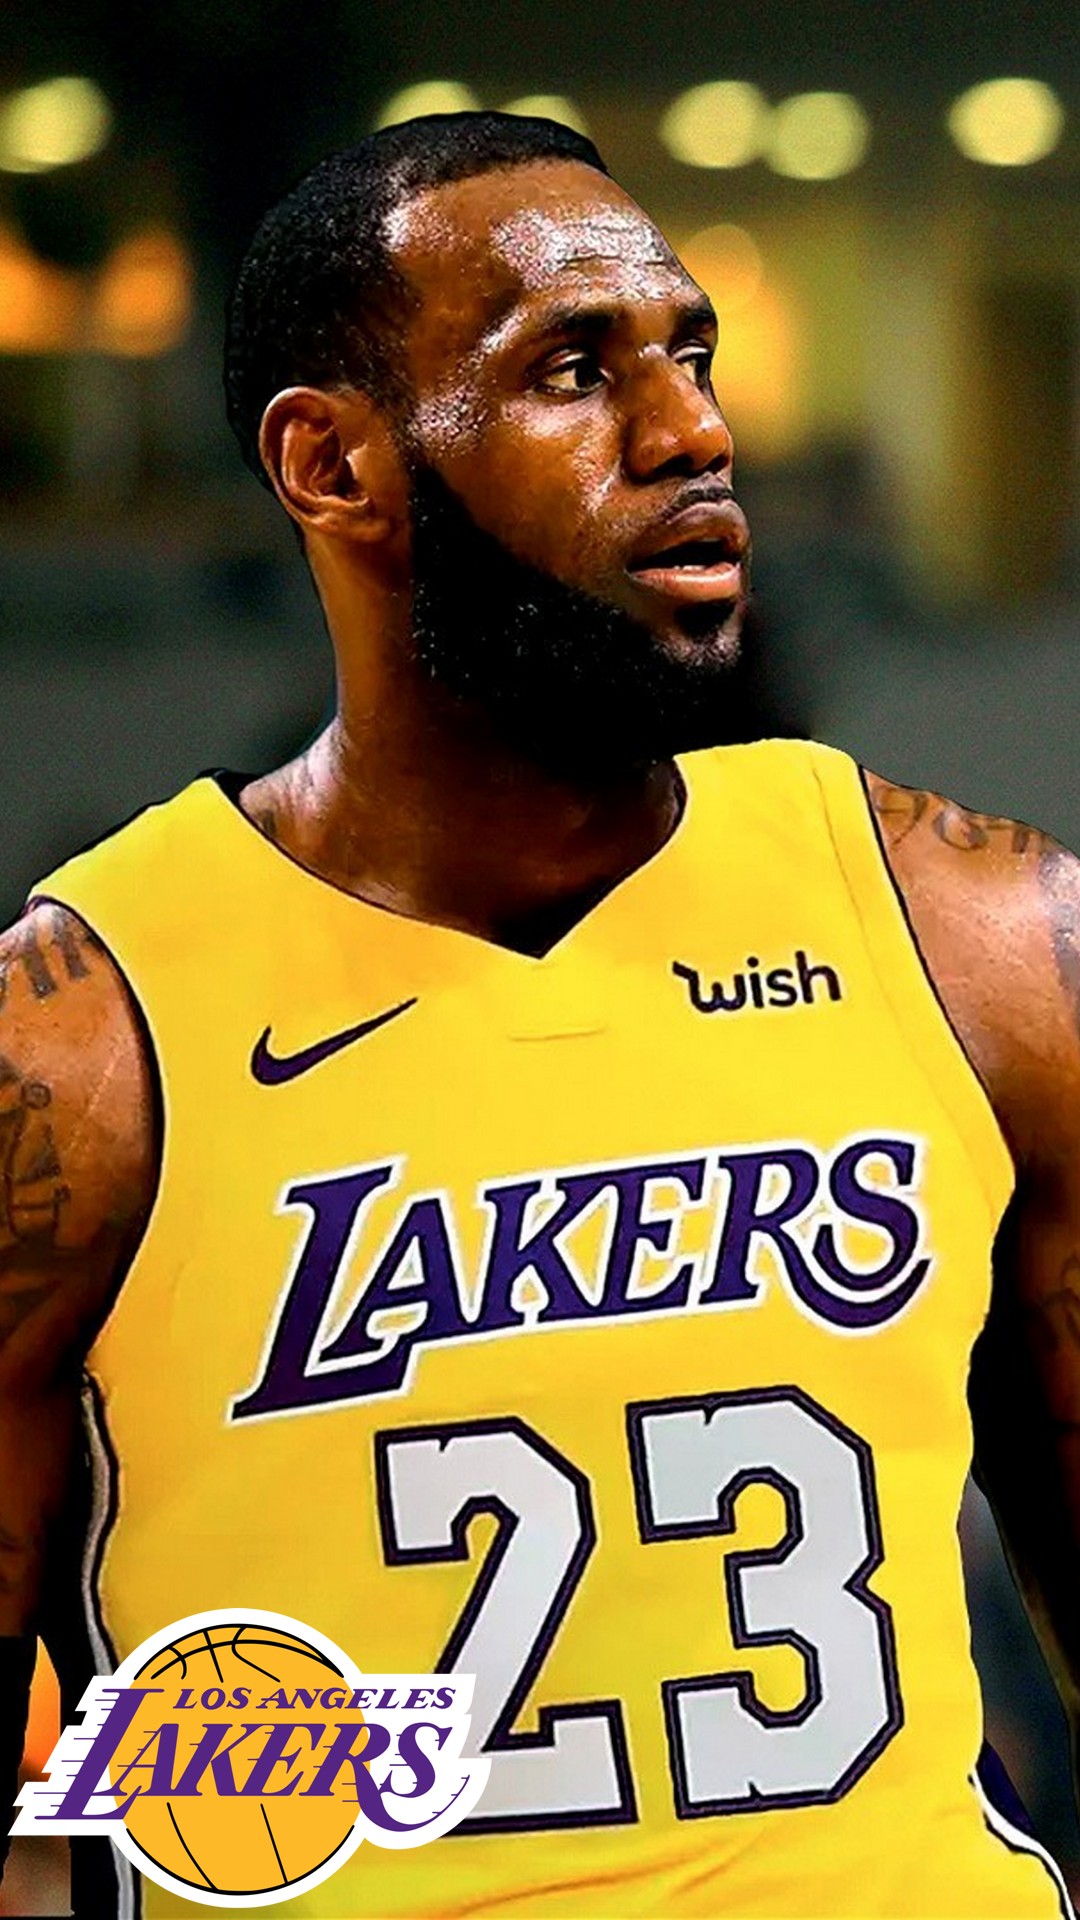 LeBron James Lakers iPhone 6 Wallpaper with image dimensions 1080x1920 pixel. You can make this wallpaper for your Desktop Computer Backgrounds, Windows or Mac Screensavers, iPhone Lock screen, Tablet or Android and another Mobile Phone device